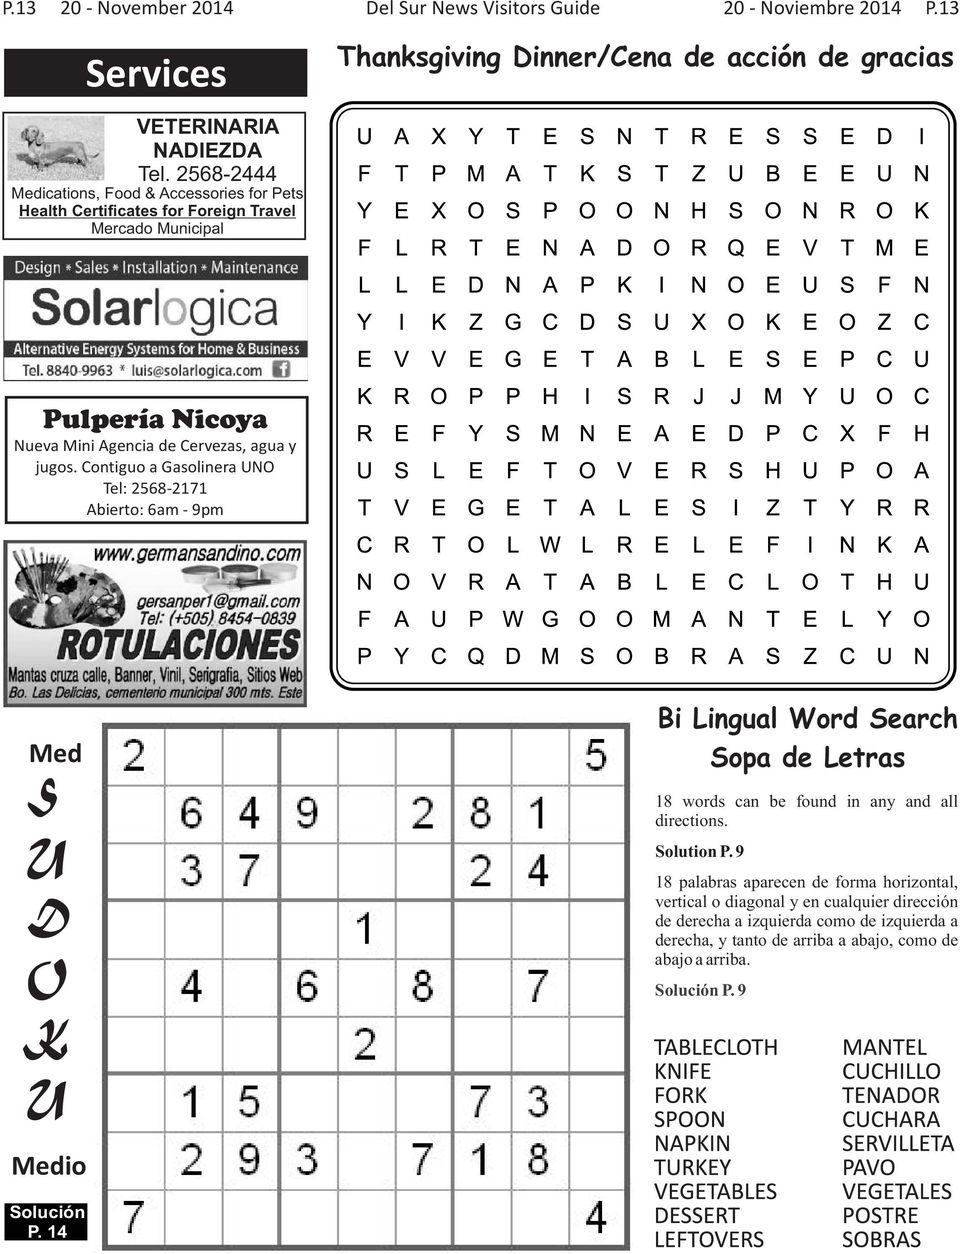 Contiguo a Gasolinera UNO Tel: 2568-2171 Abierto: 6am - 9pm Med Bi Lingual Word Search Sopa de Letras 18 words can be found in any and all directions. Solution P.